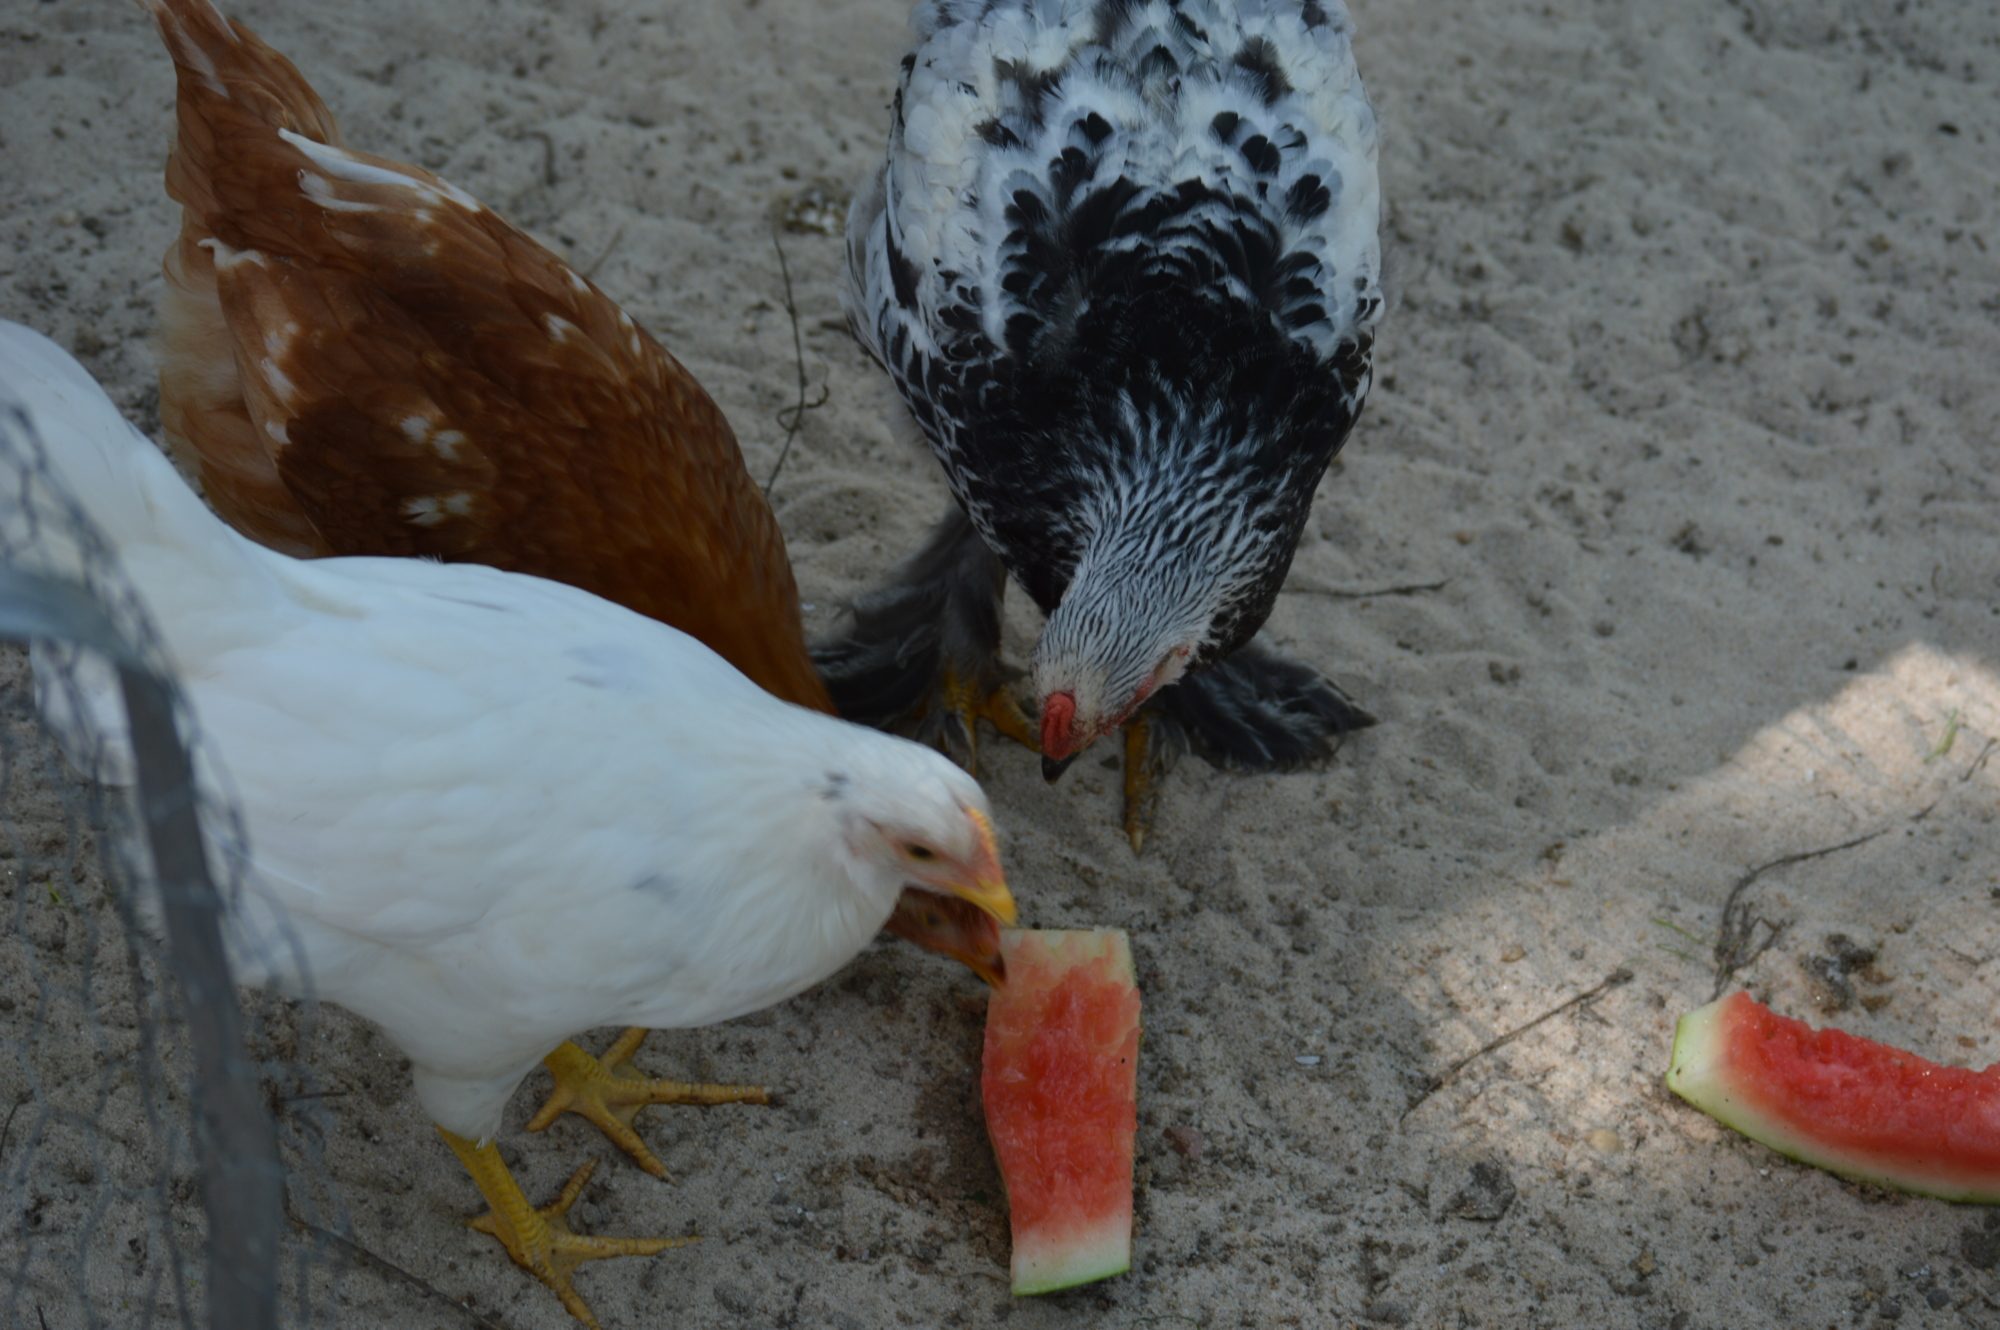 they love watermelon on hot days